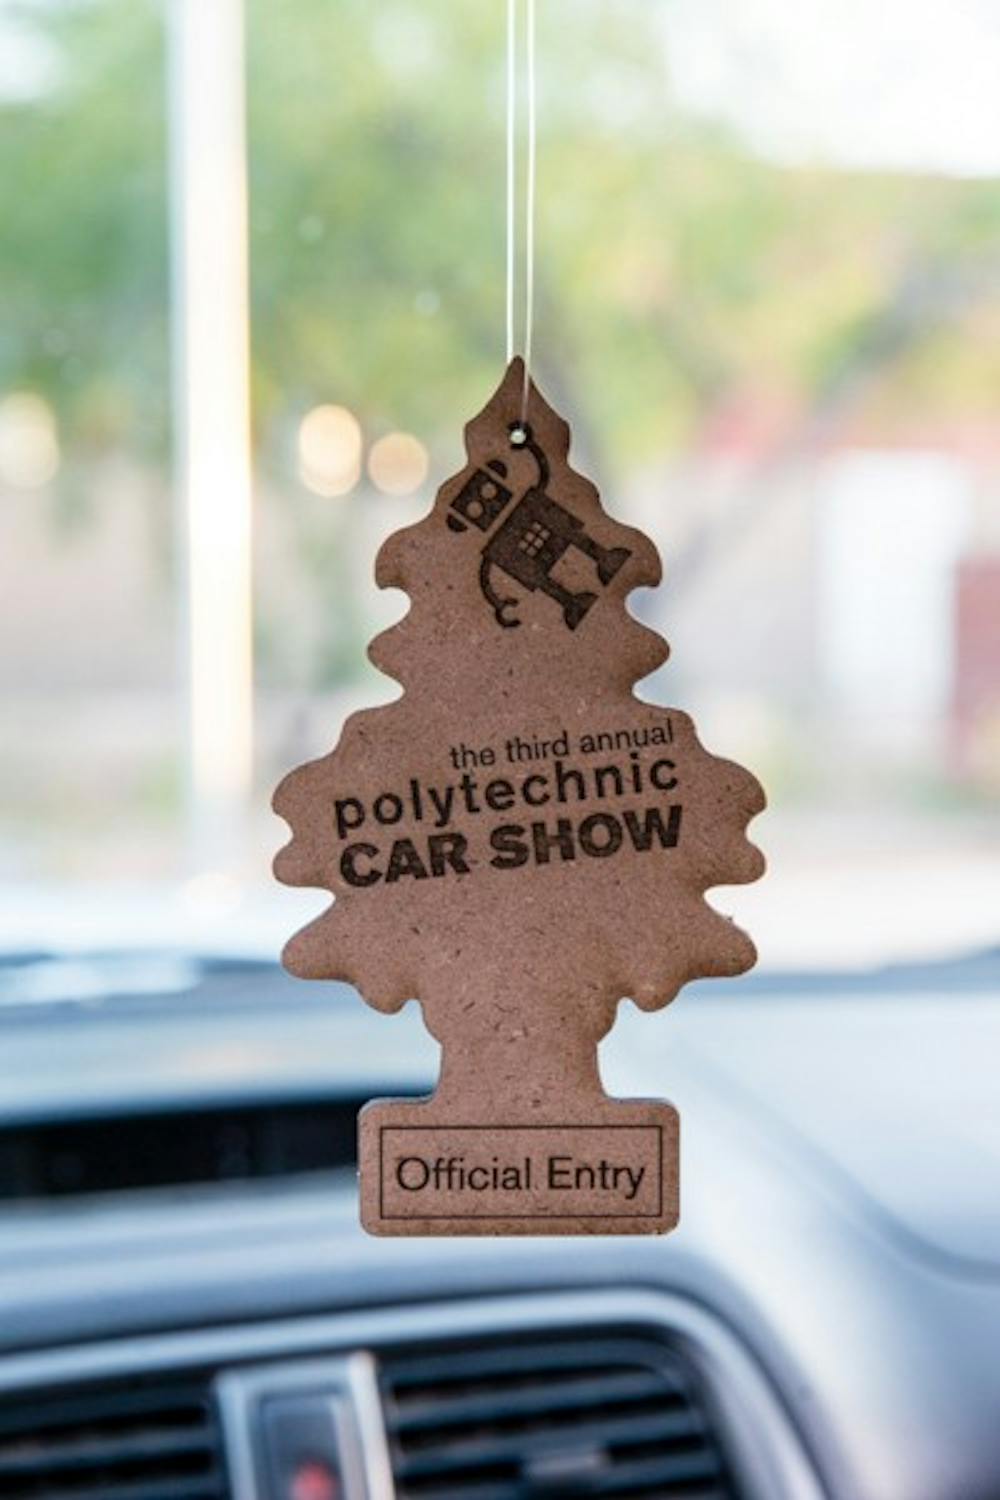 Entrants of the 3rd Annual Polytechnic Car Show received a custom air freshener as a gift. (Photo by Andrew Ybanez)